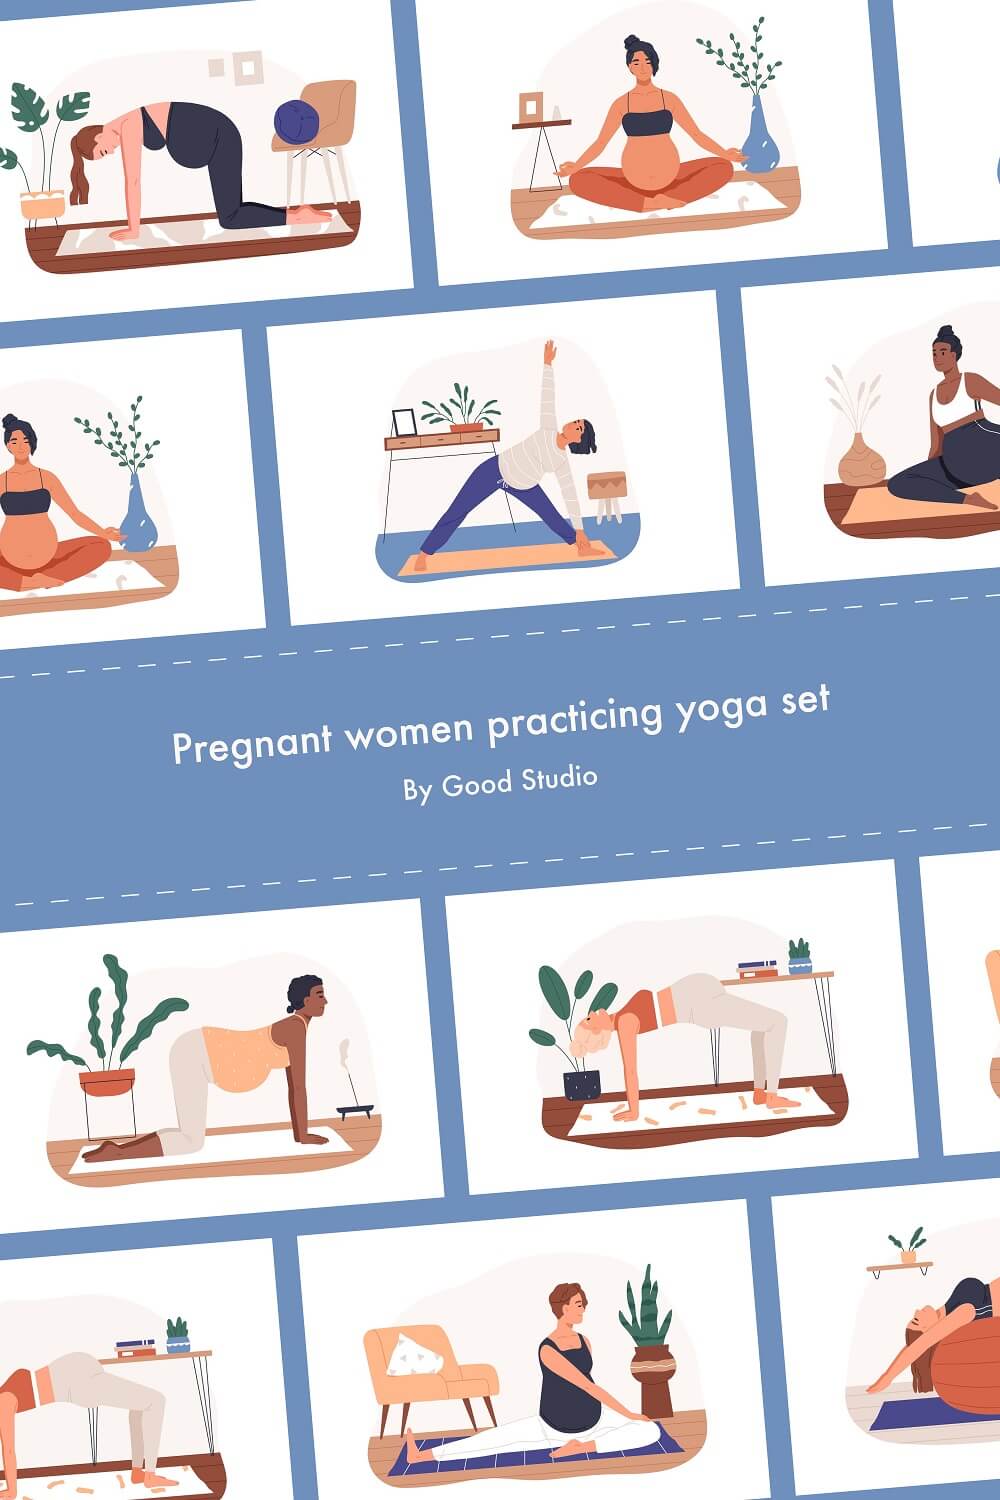 Diagonal image with pregnant women actively practicing yoga.